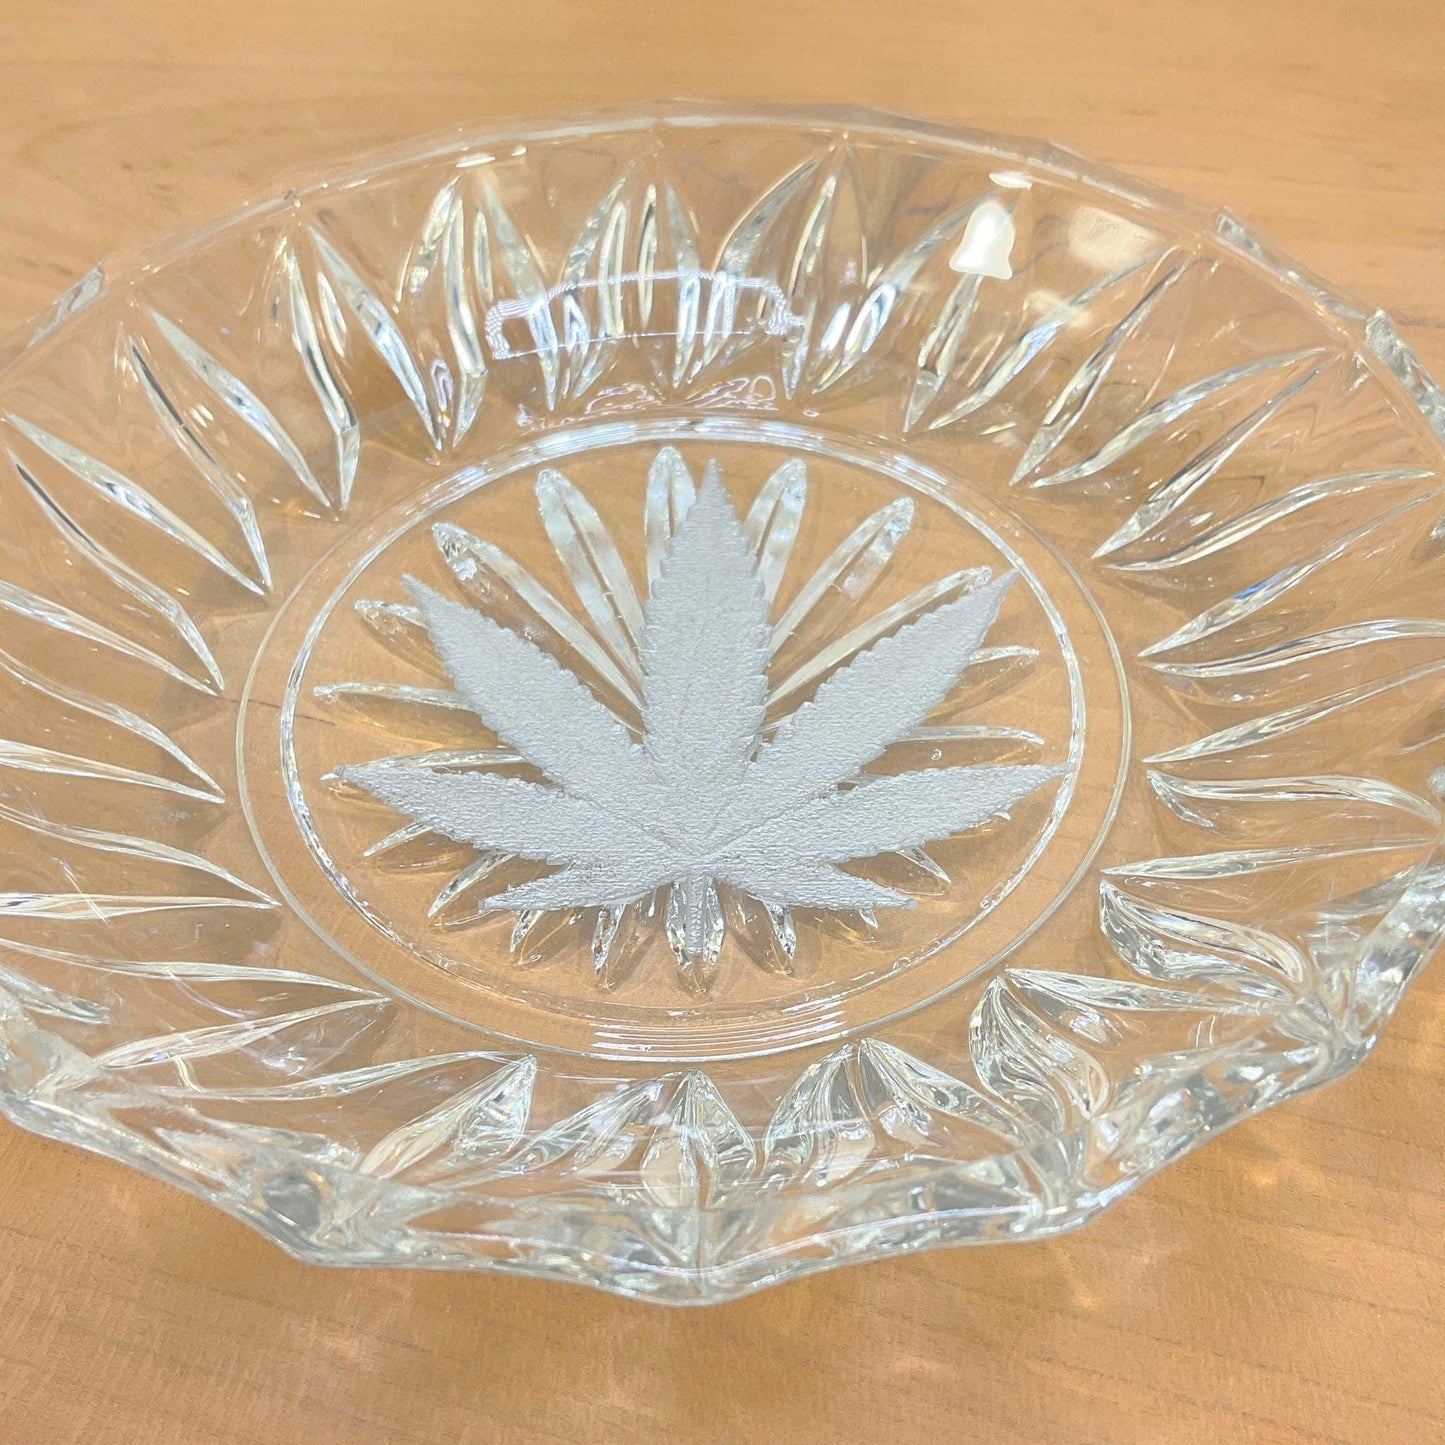 Cannabis Candy Dish - Offensively Domestic